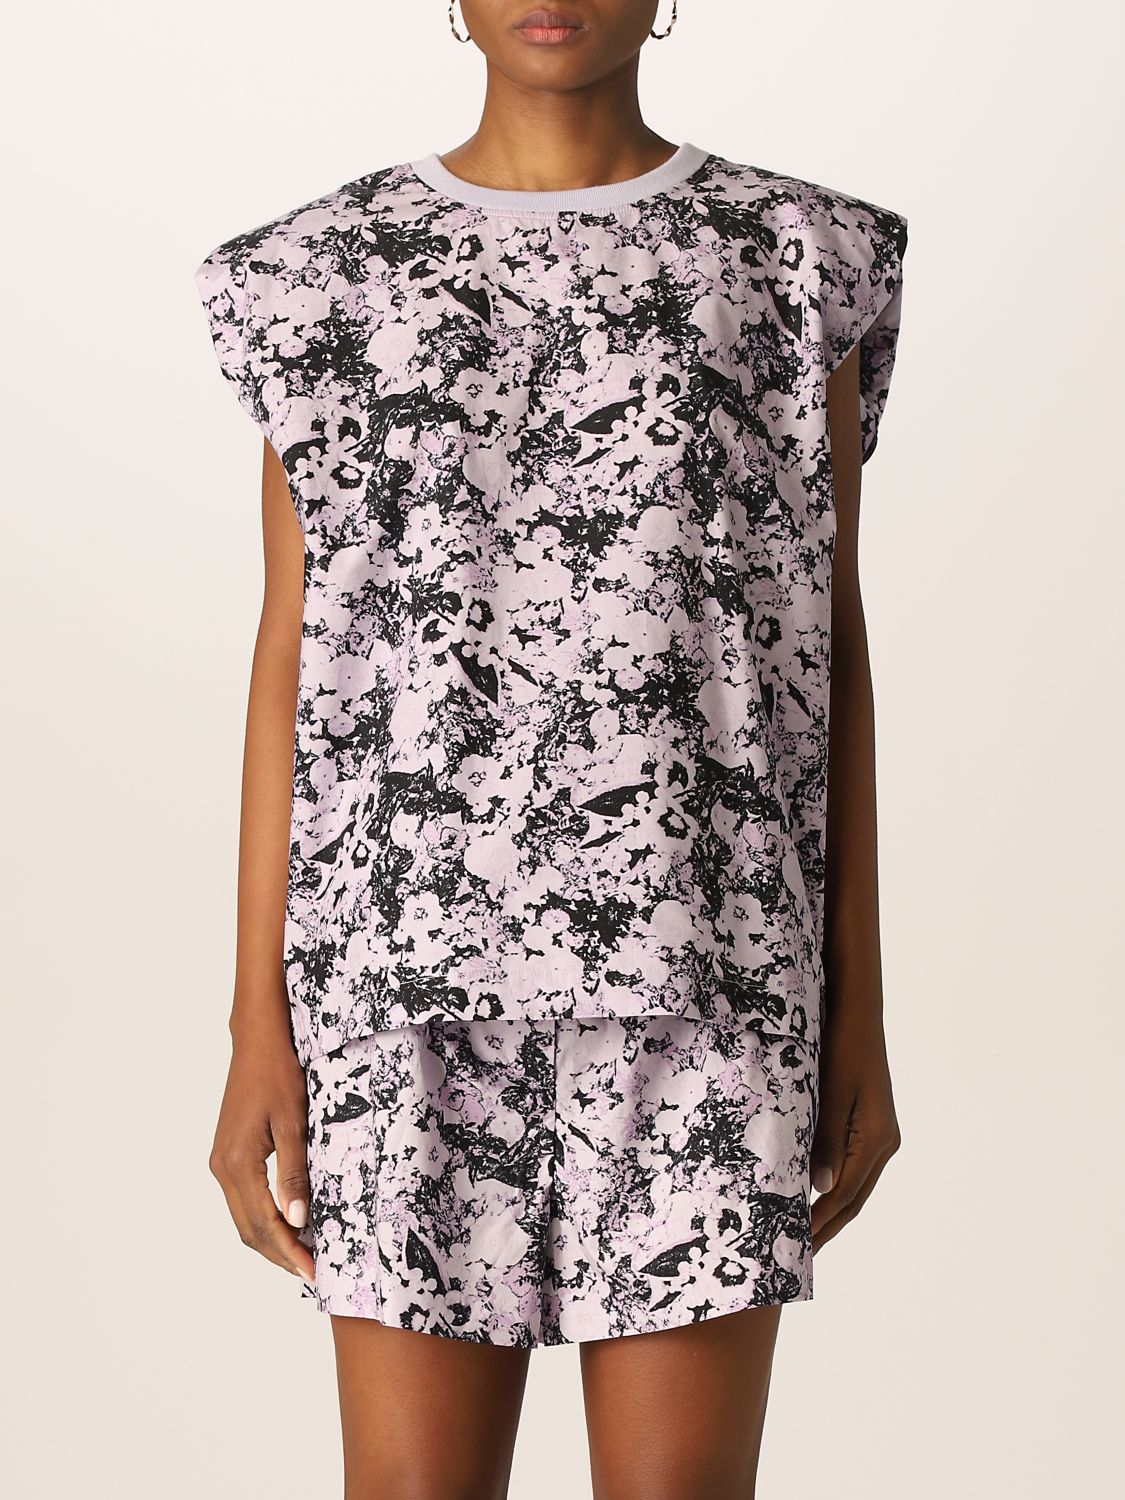 Remain Remain floral patterned top